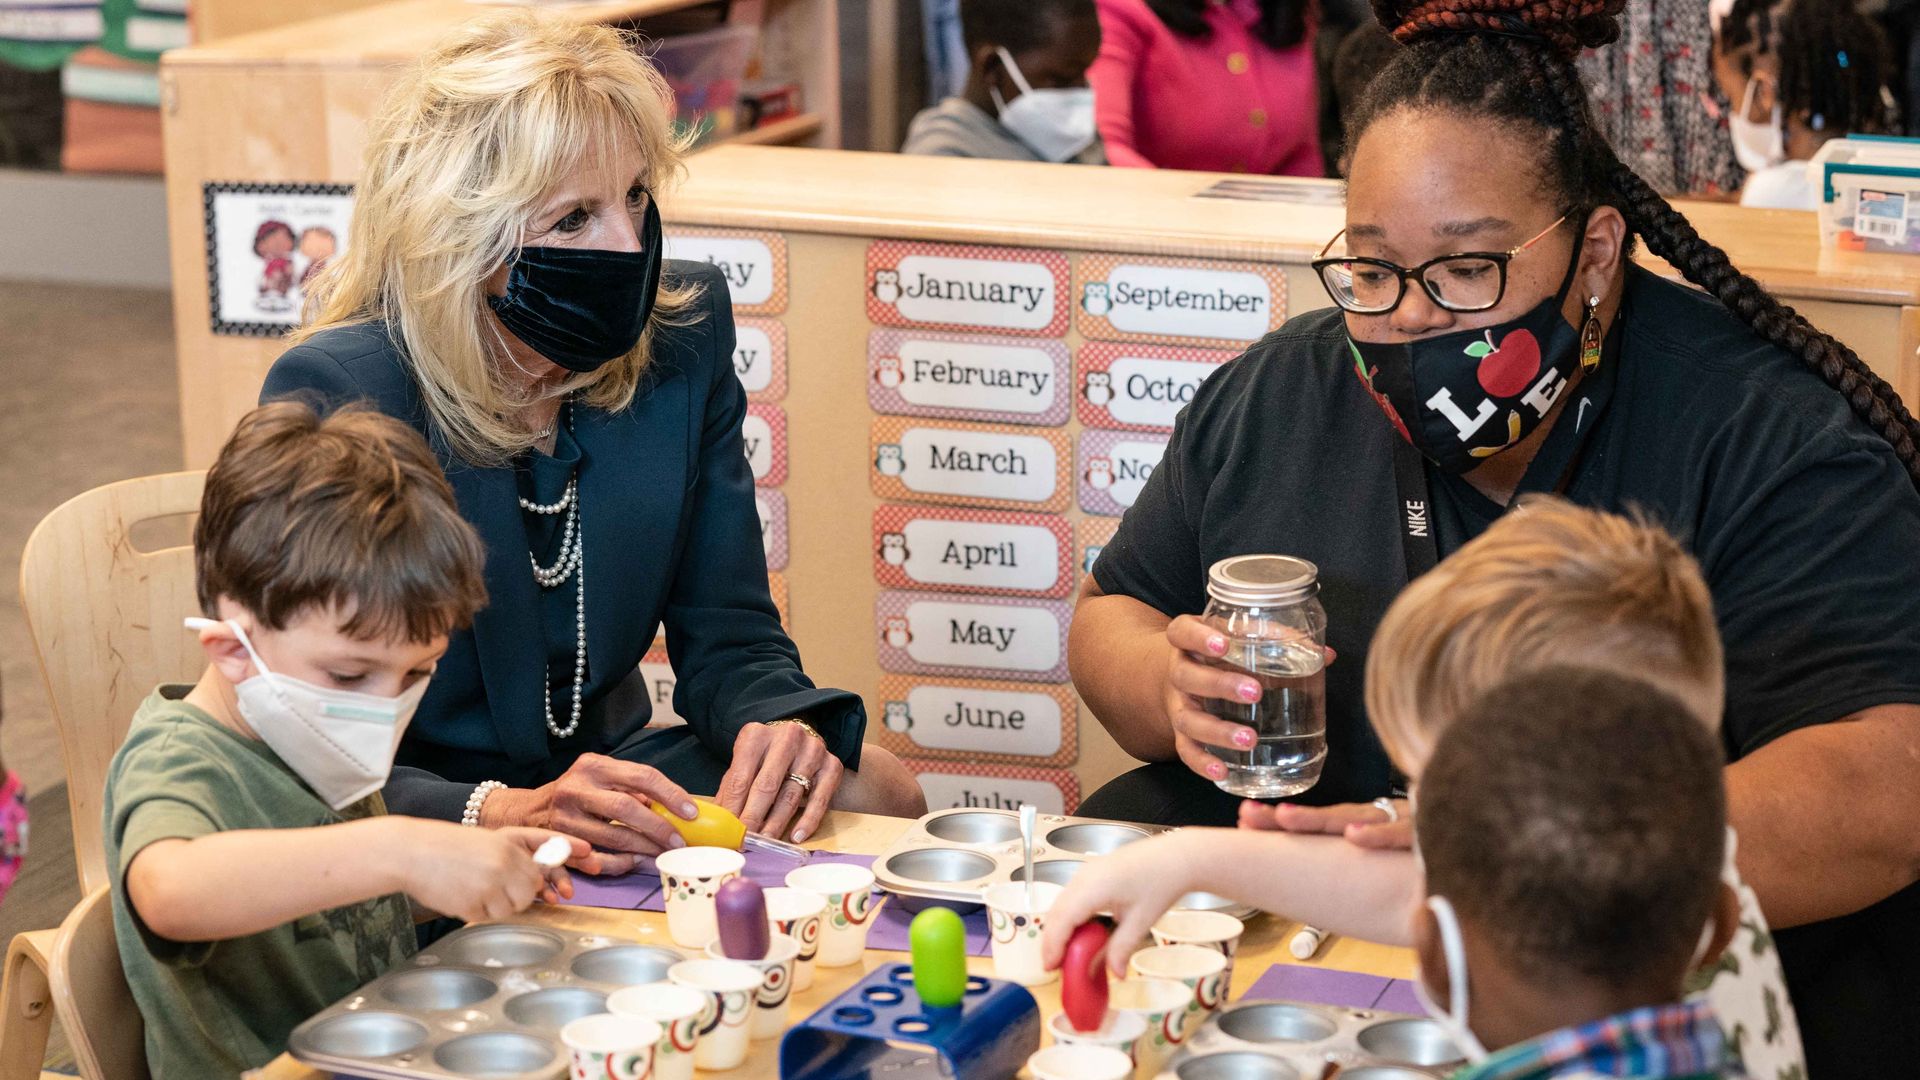 First lady Jill Biden is seen in a classroom during a visit Friday to Birmingham, Ala.